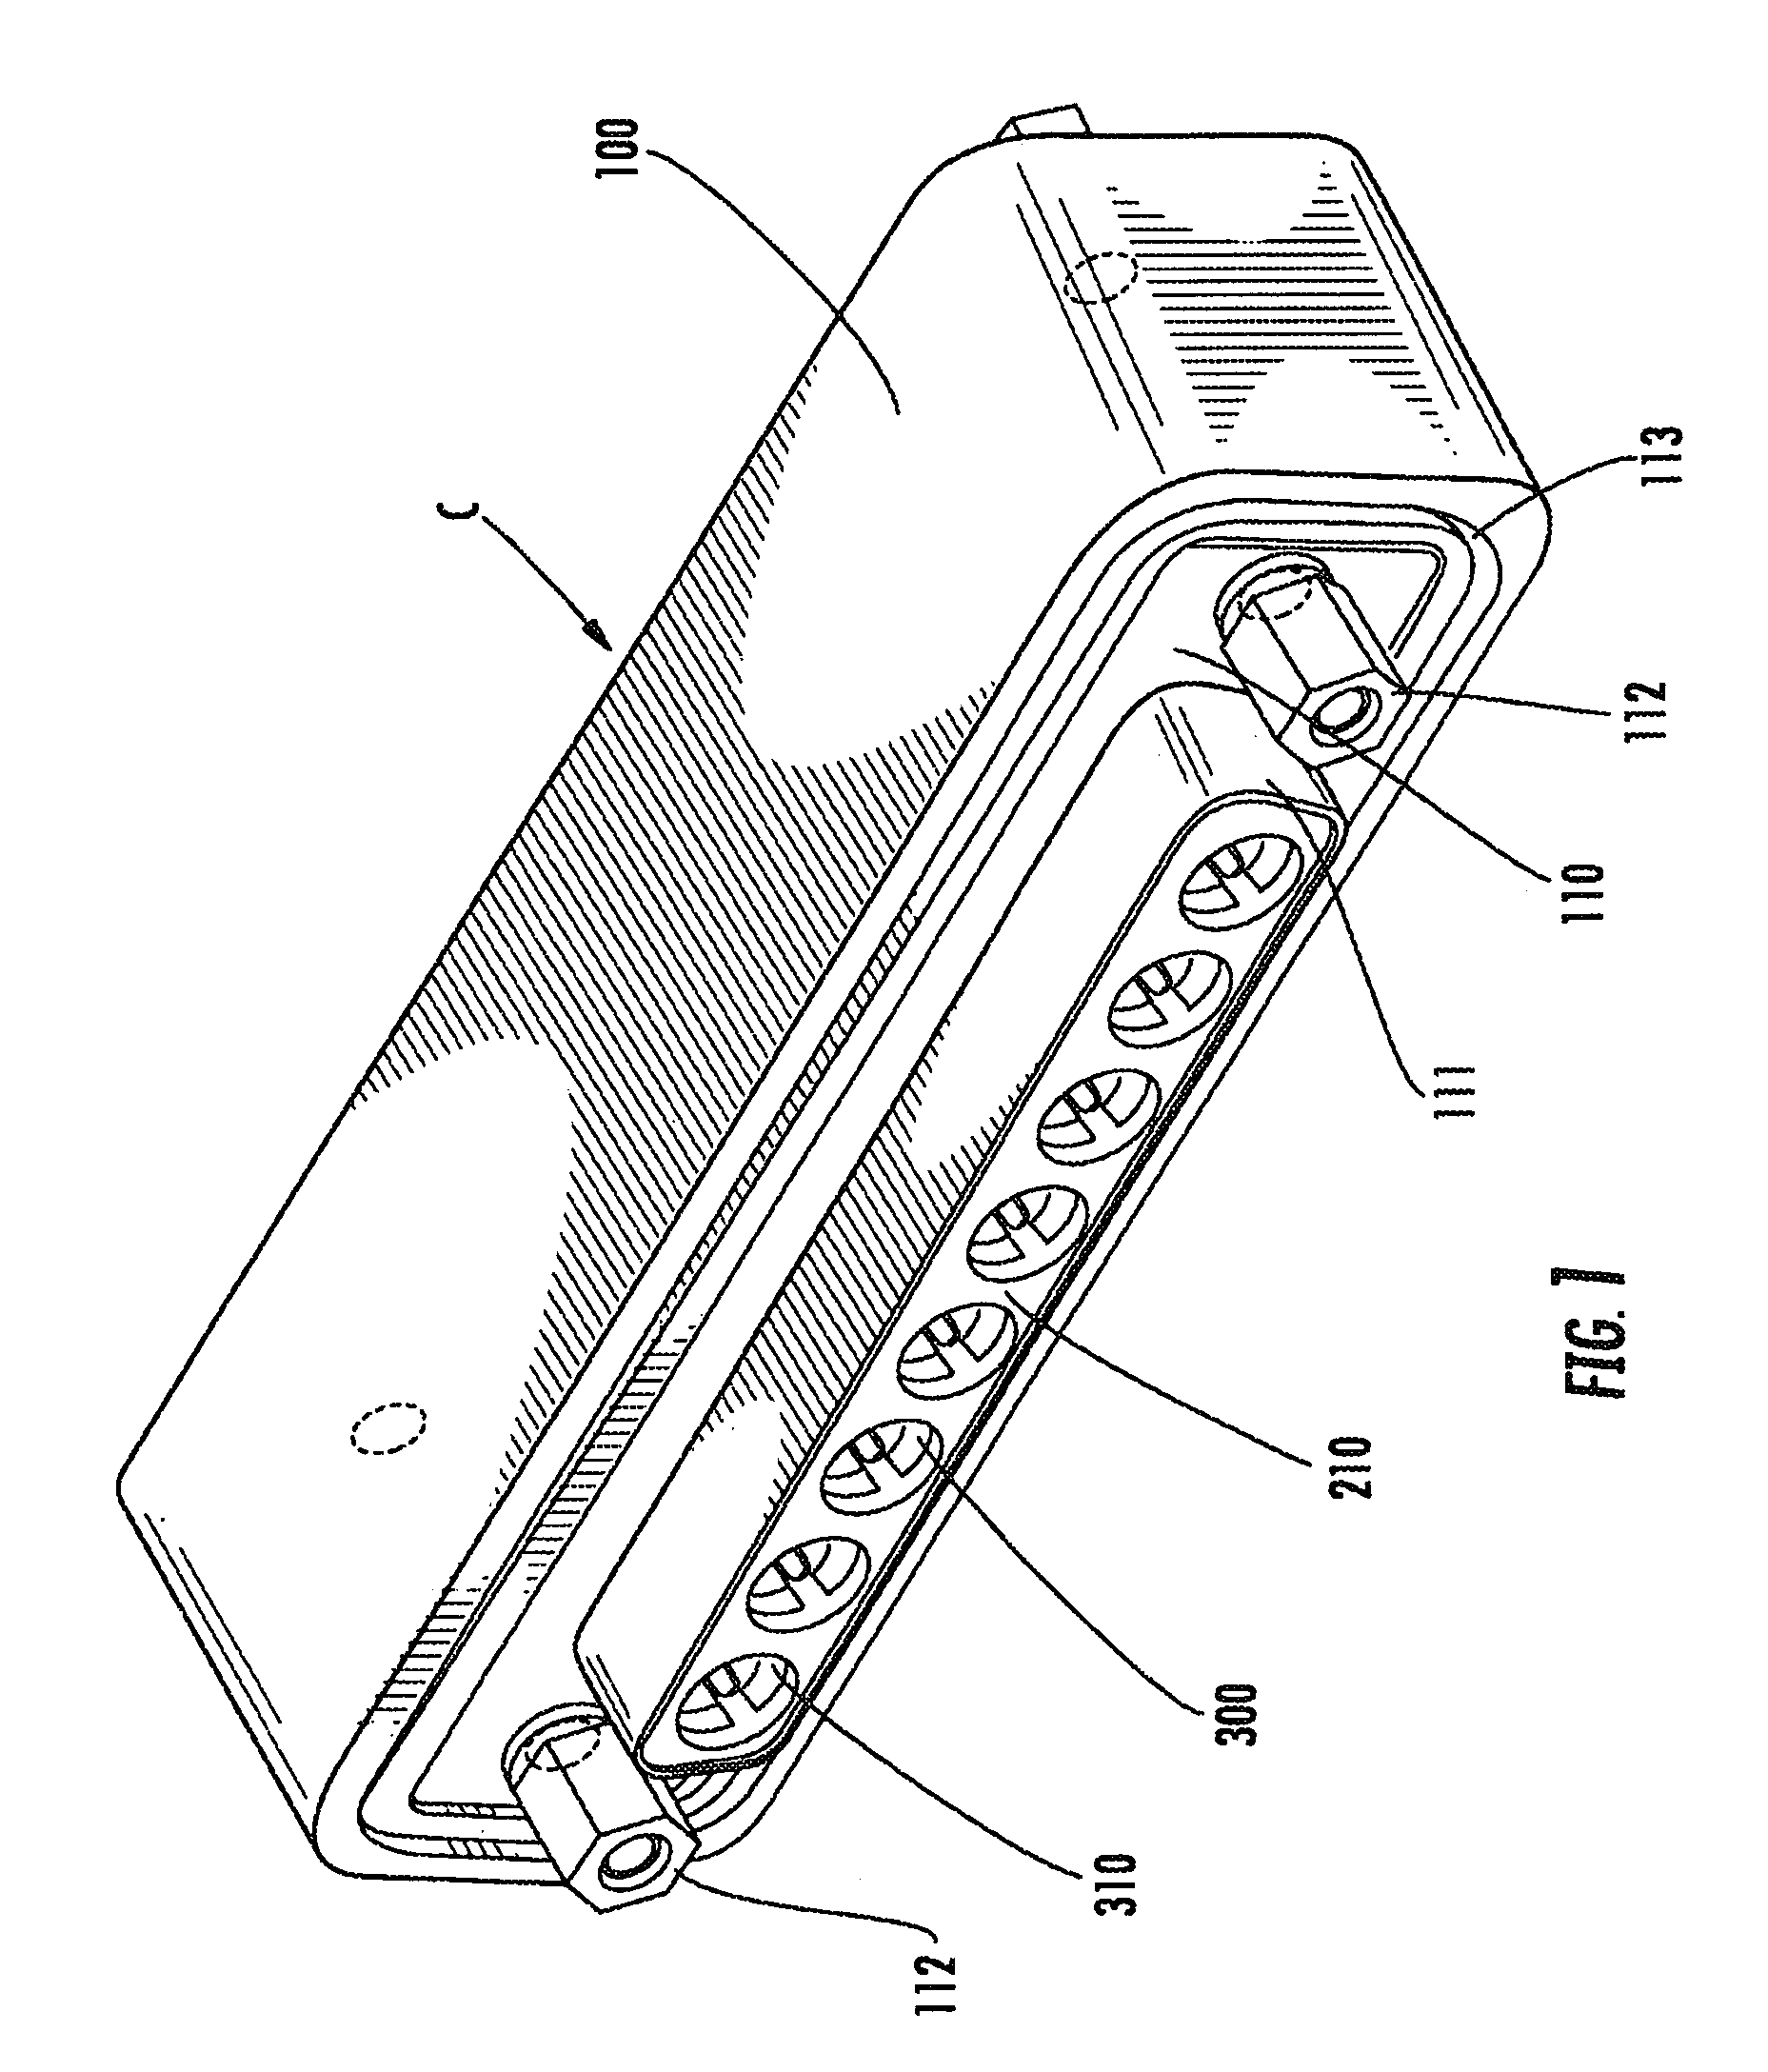 Method for sealing partition bushing connector coaxial contacts, adapted coaxial contact and resulting connector